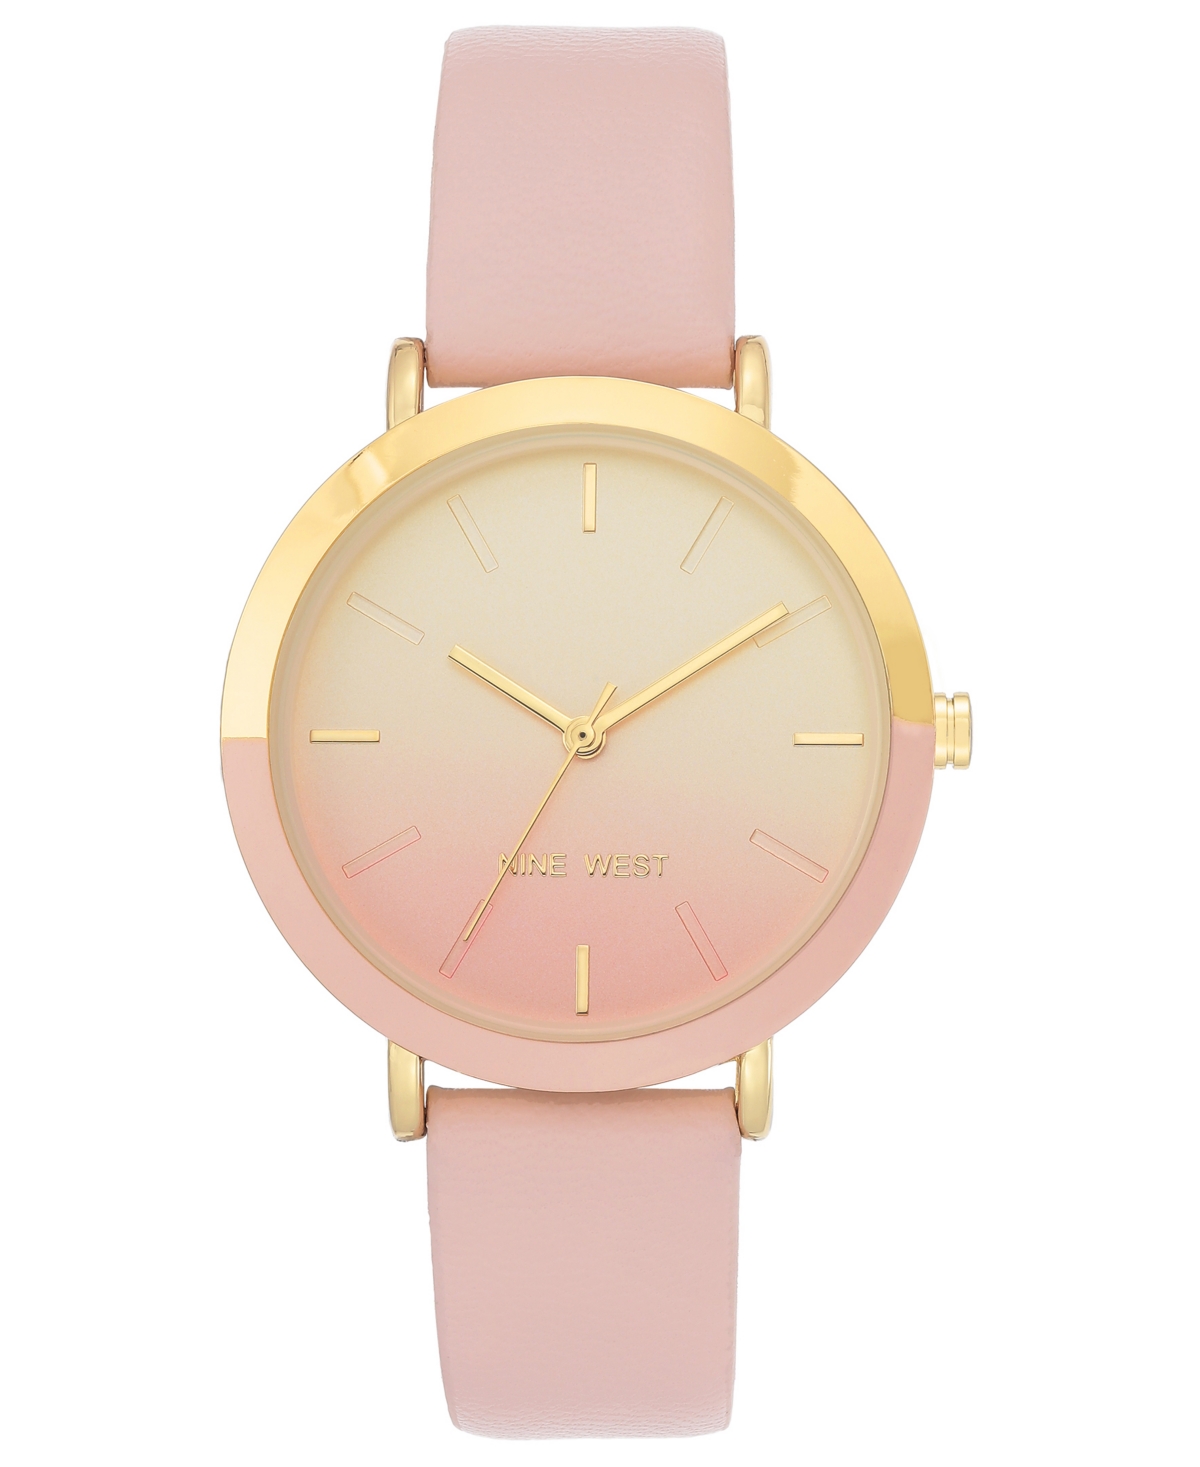 Nine West Women's Quartz Pink Faux Leather Band Watch, 36mm In Pink,gold-tone